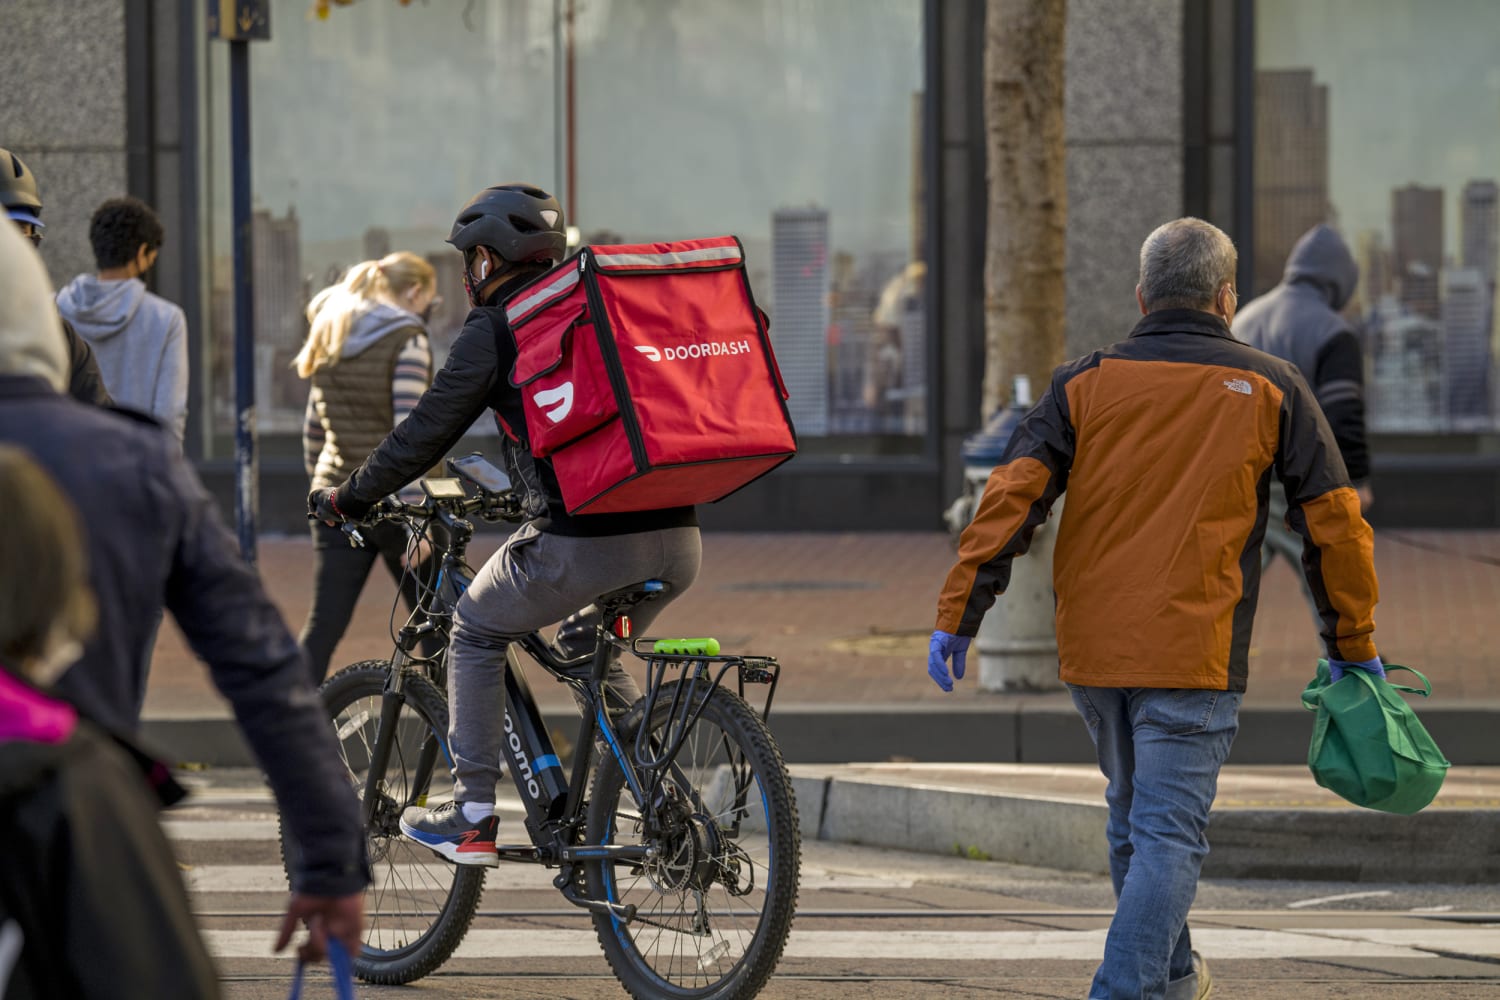 DoorDash pushes back against fee delivery commissions with new charges